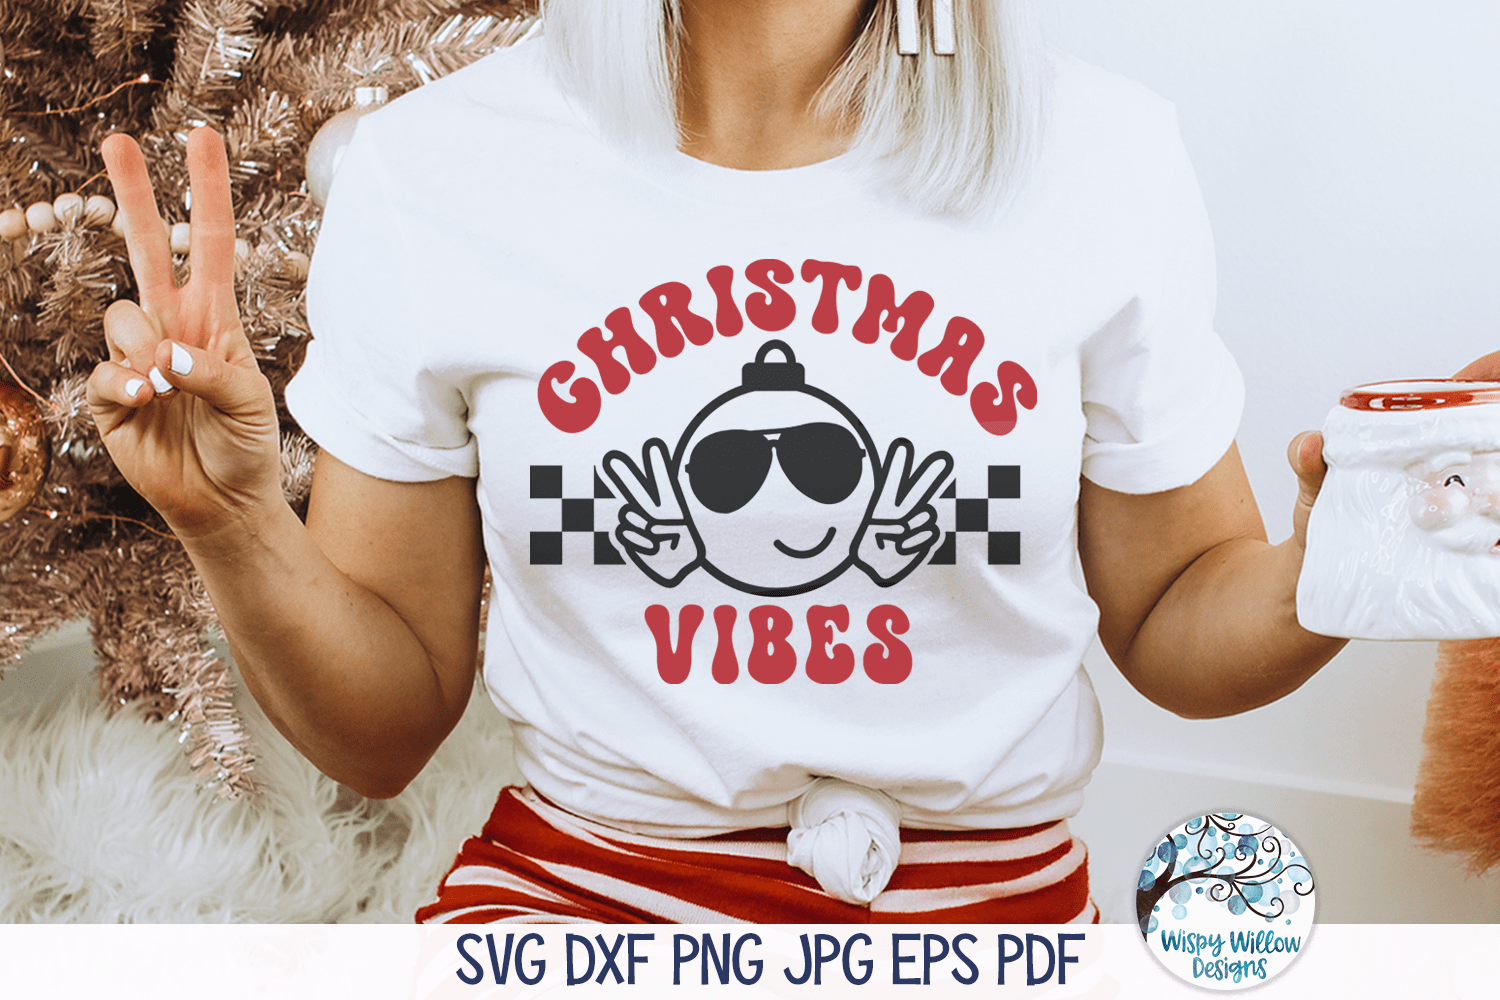 Christmas Vibes SVG | Funny Groovy Christmas Ornament with Peace Fingers Sign Wispy Willow Designs Company